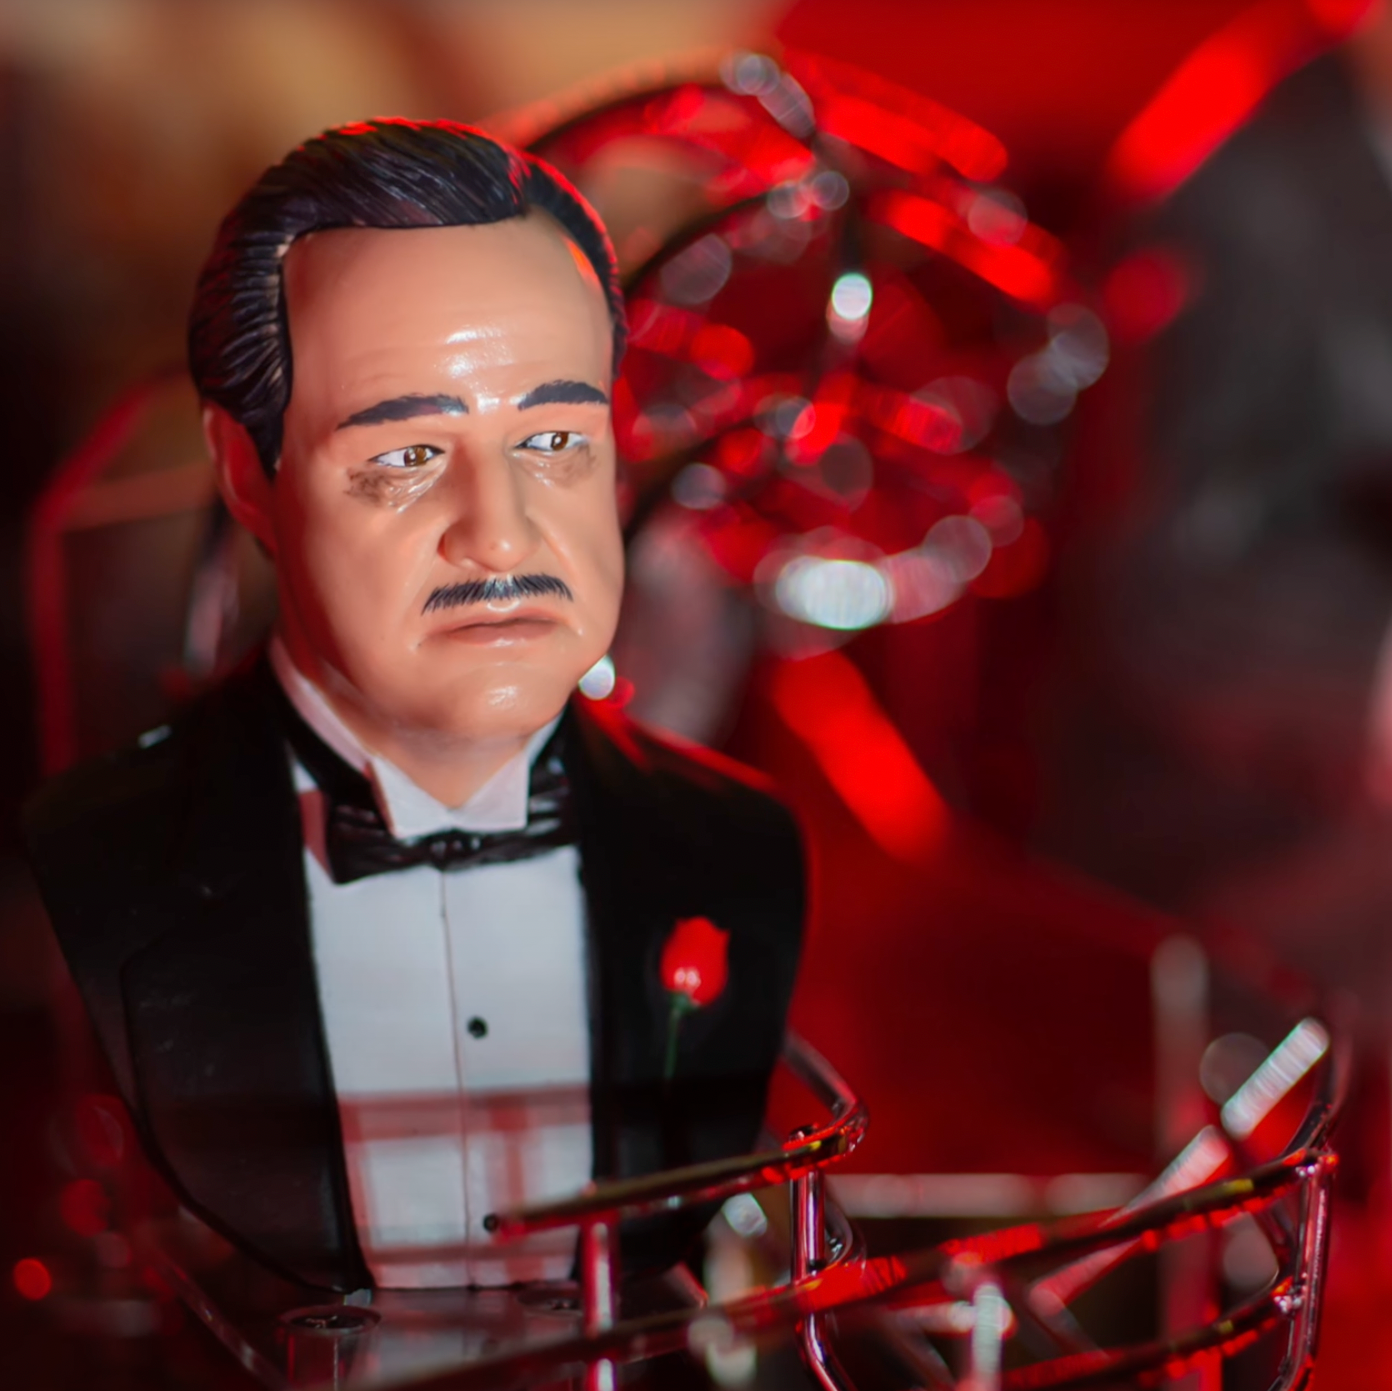 The Godfather 50th Anniversary Limited Edition 2023 Pinball by Jersey Jack